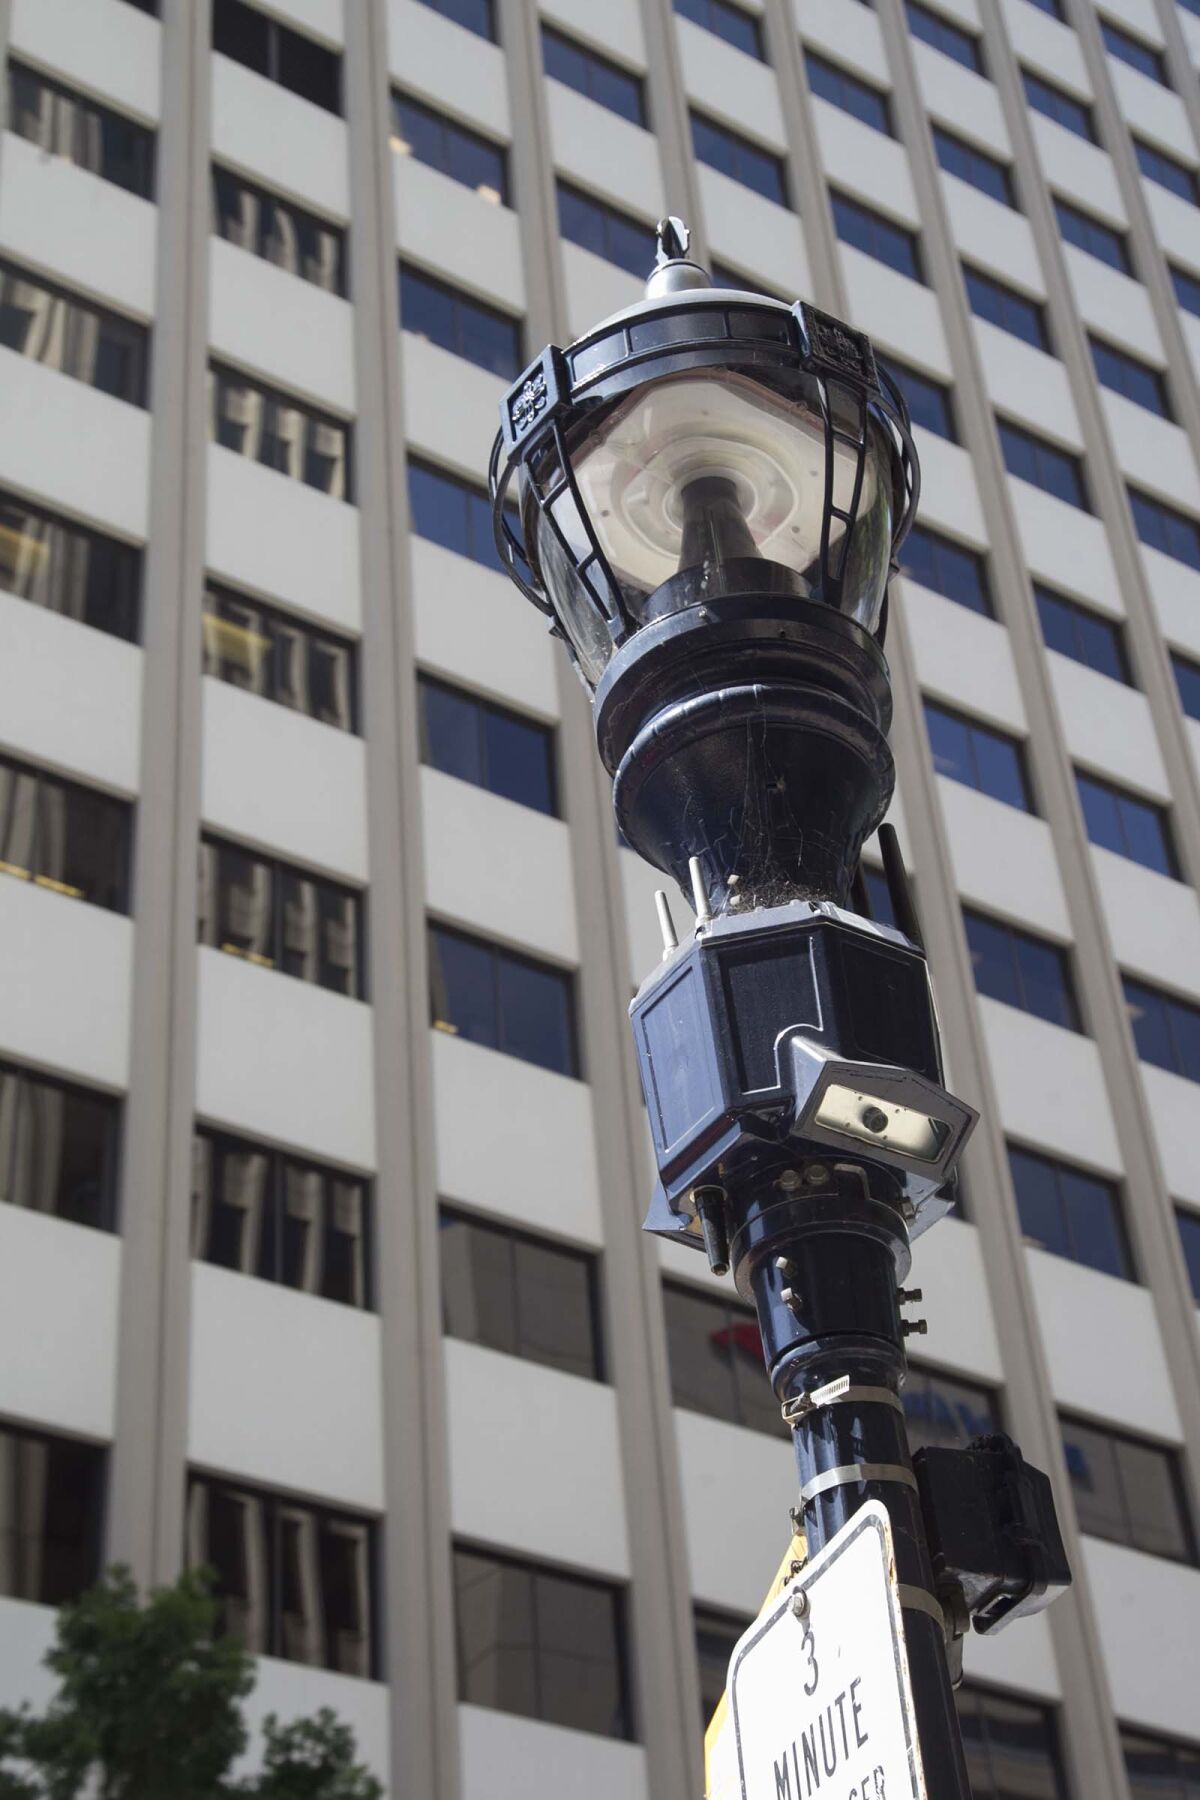 A "smart" streetlamps that include an array of sensors including video and audio in downtown San Diego. The module below the traditional light houses the cameras, antennas and other instruments.